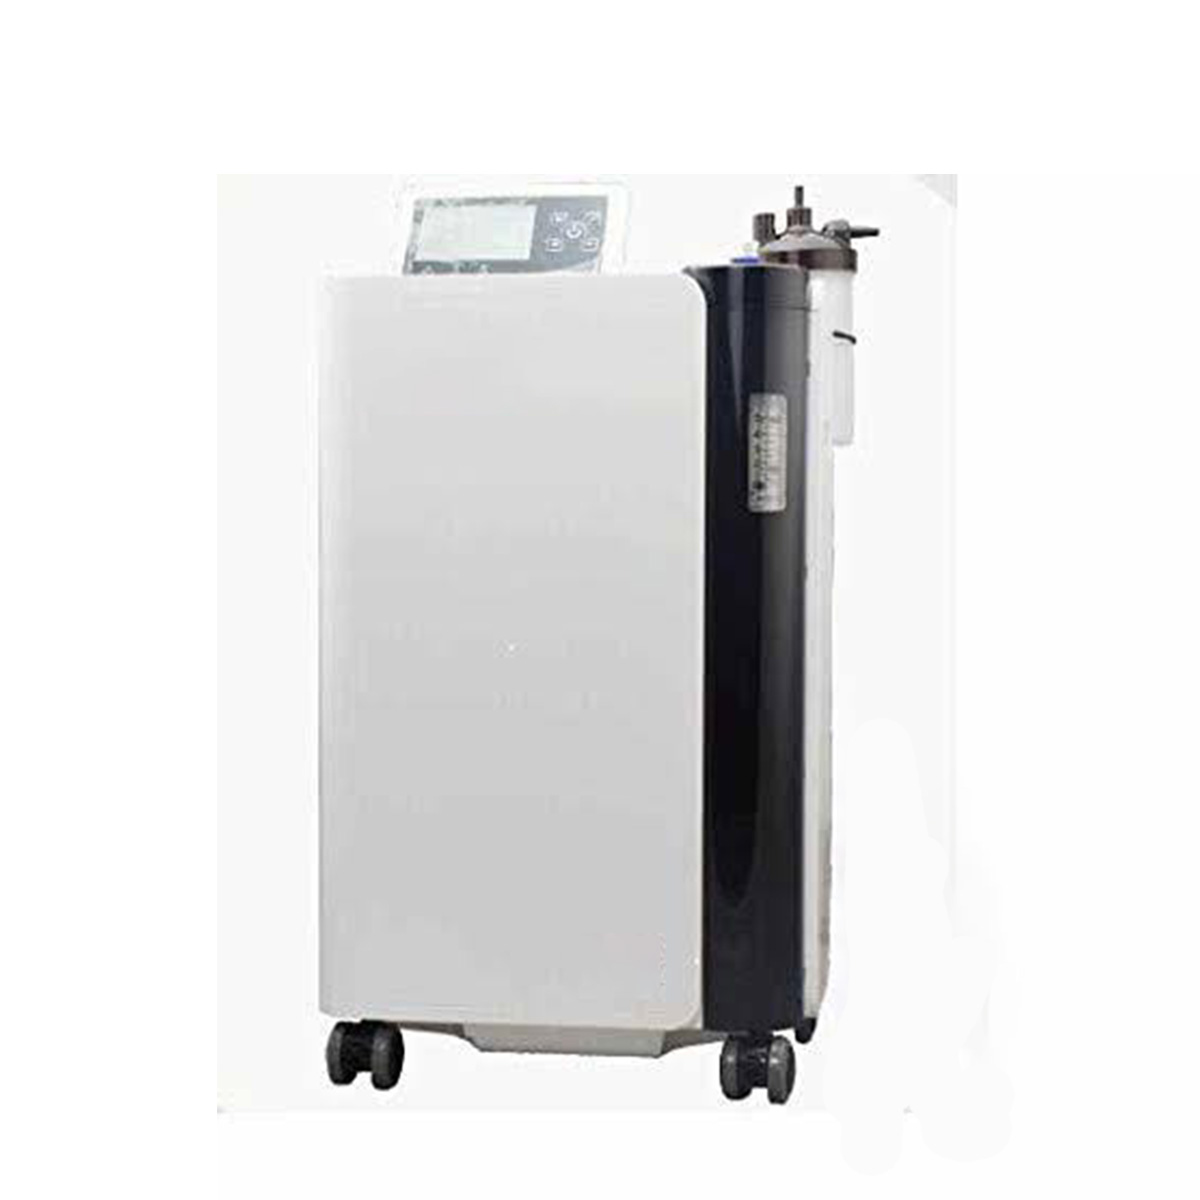 5 Lpm Oxymed Oxygen Concentrator On Sale Suppliers, Service Provider in Chhatarpur